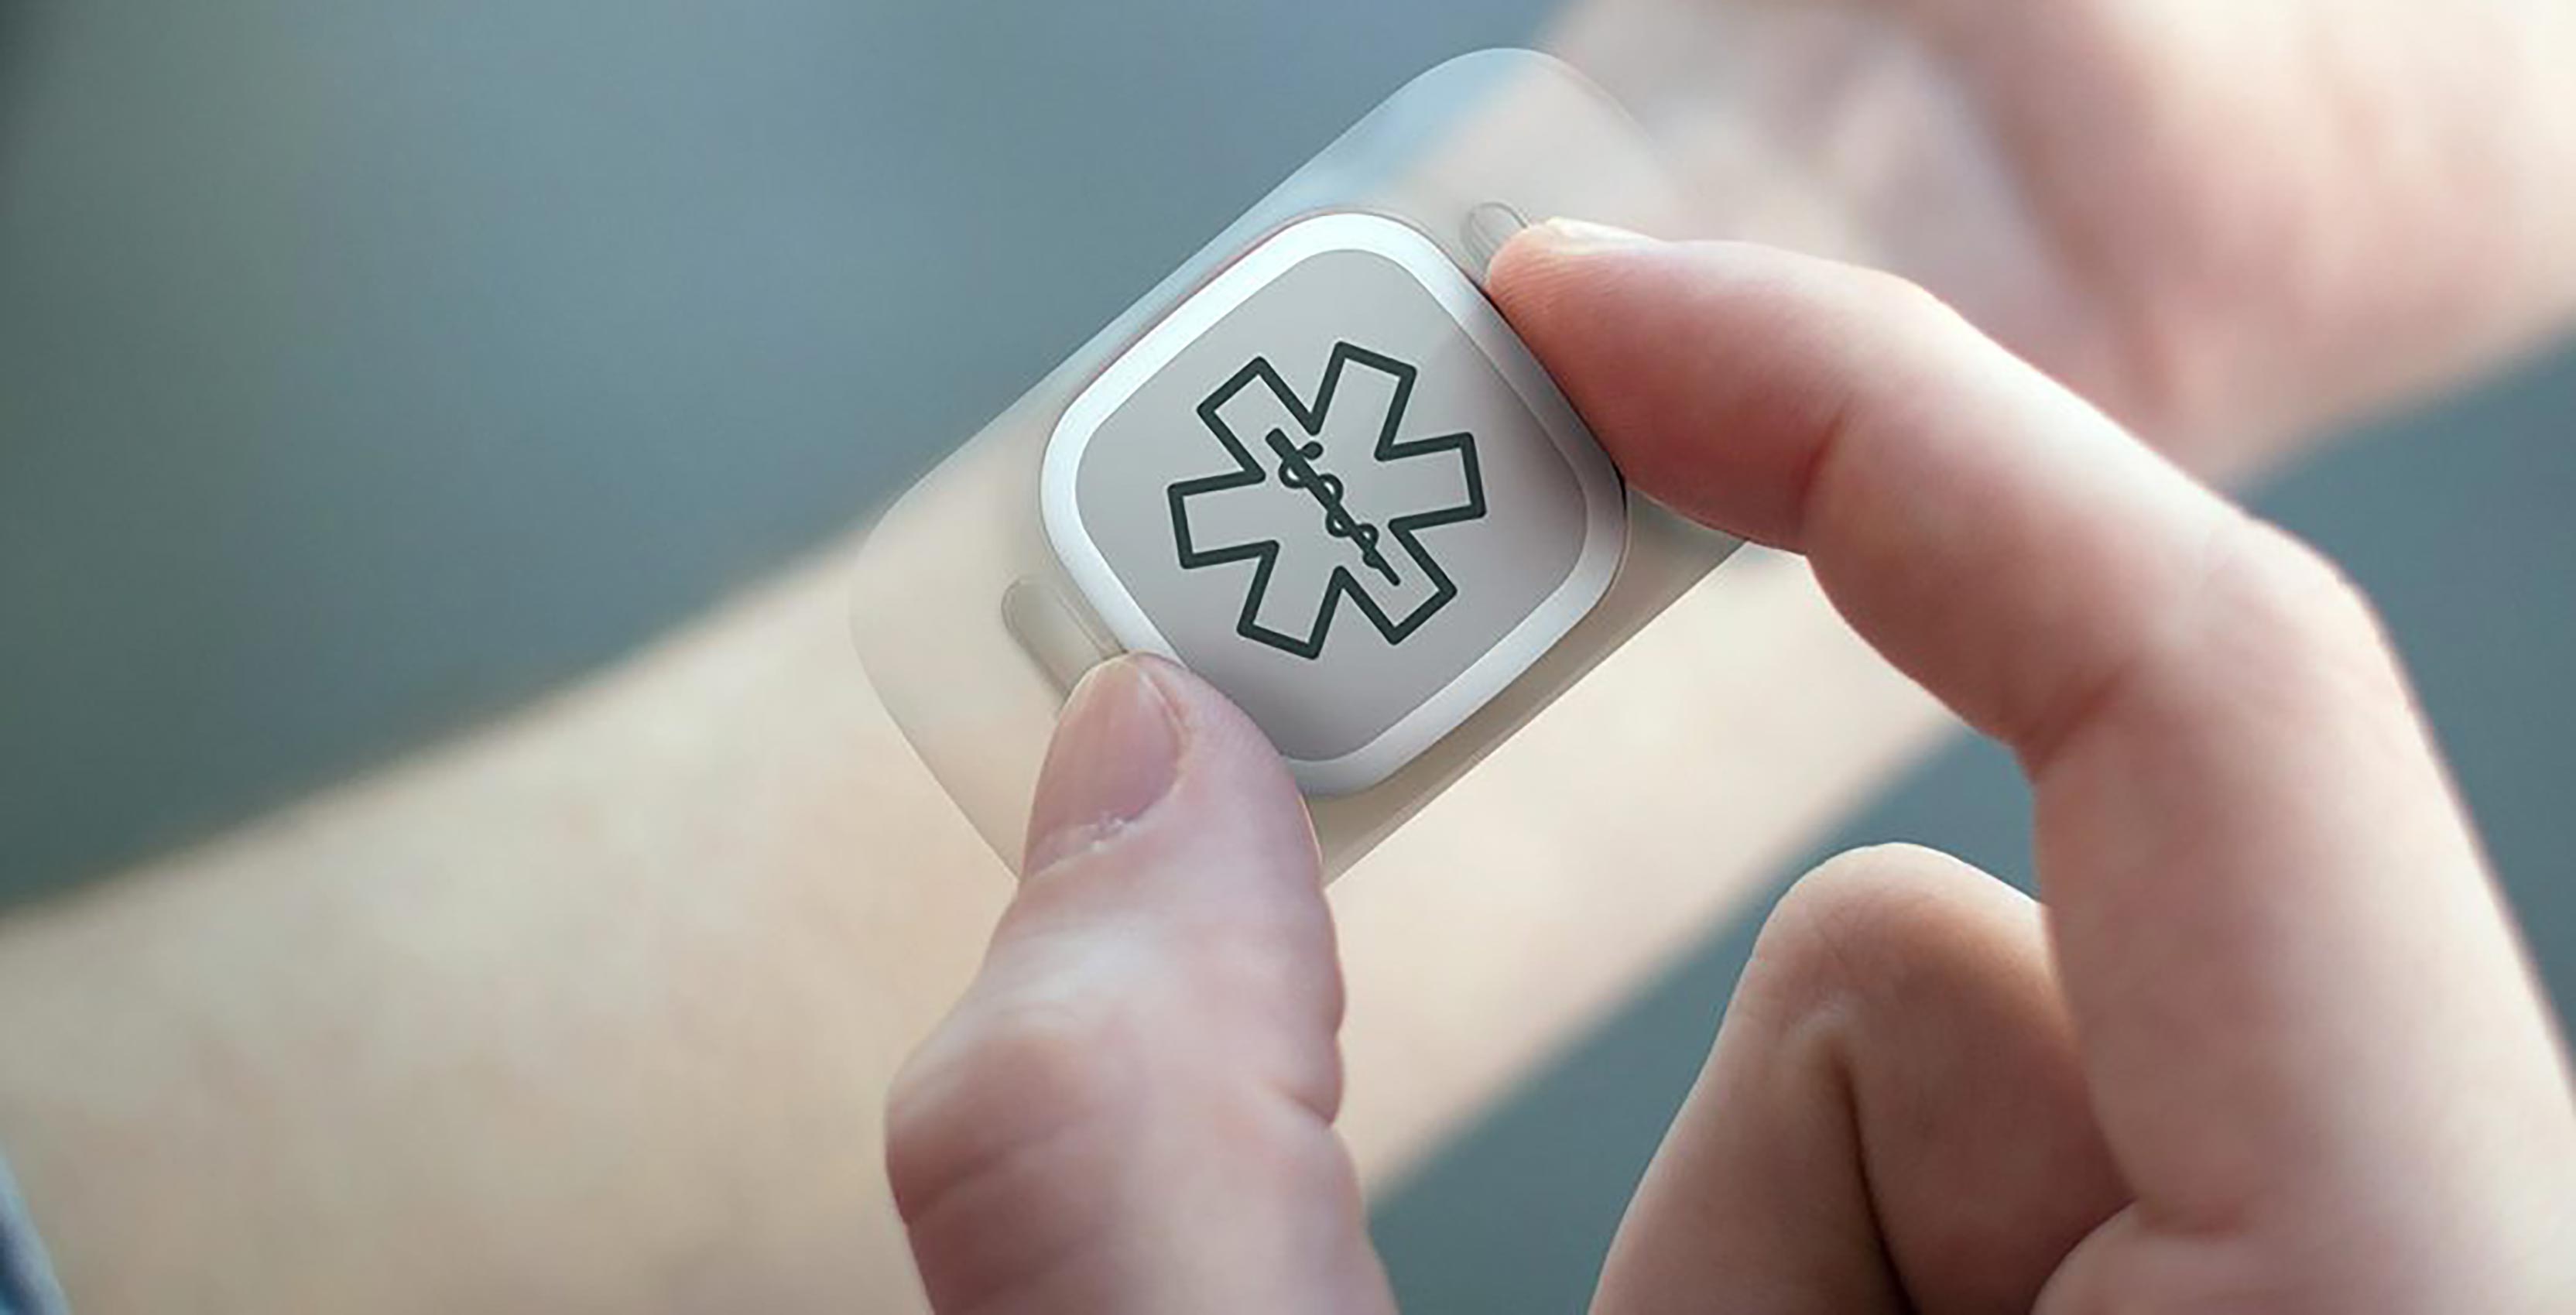 Wearable in hand with medical symbol